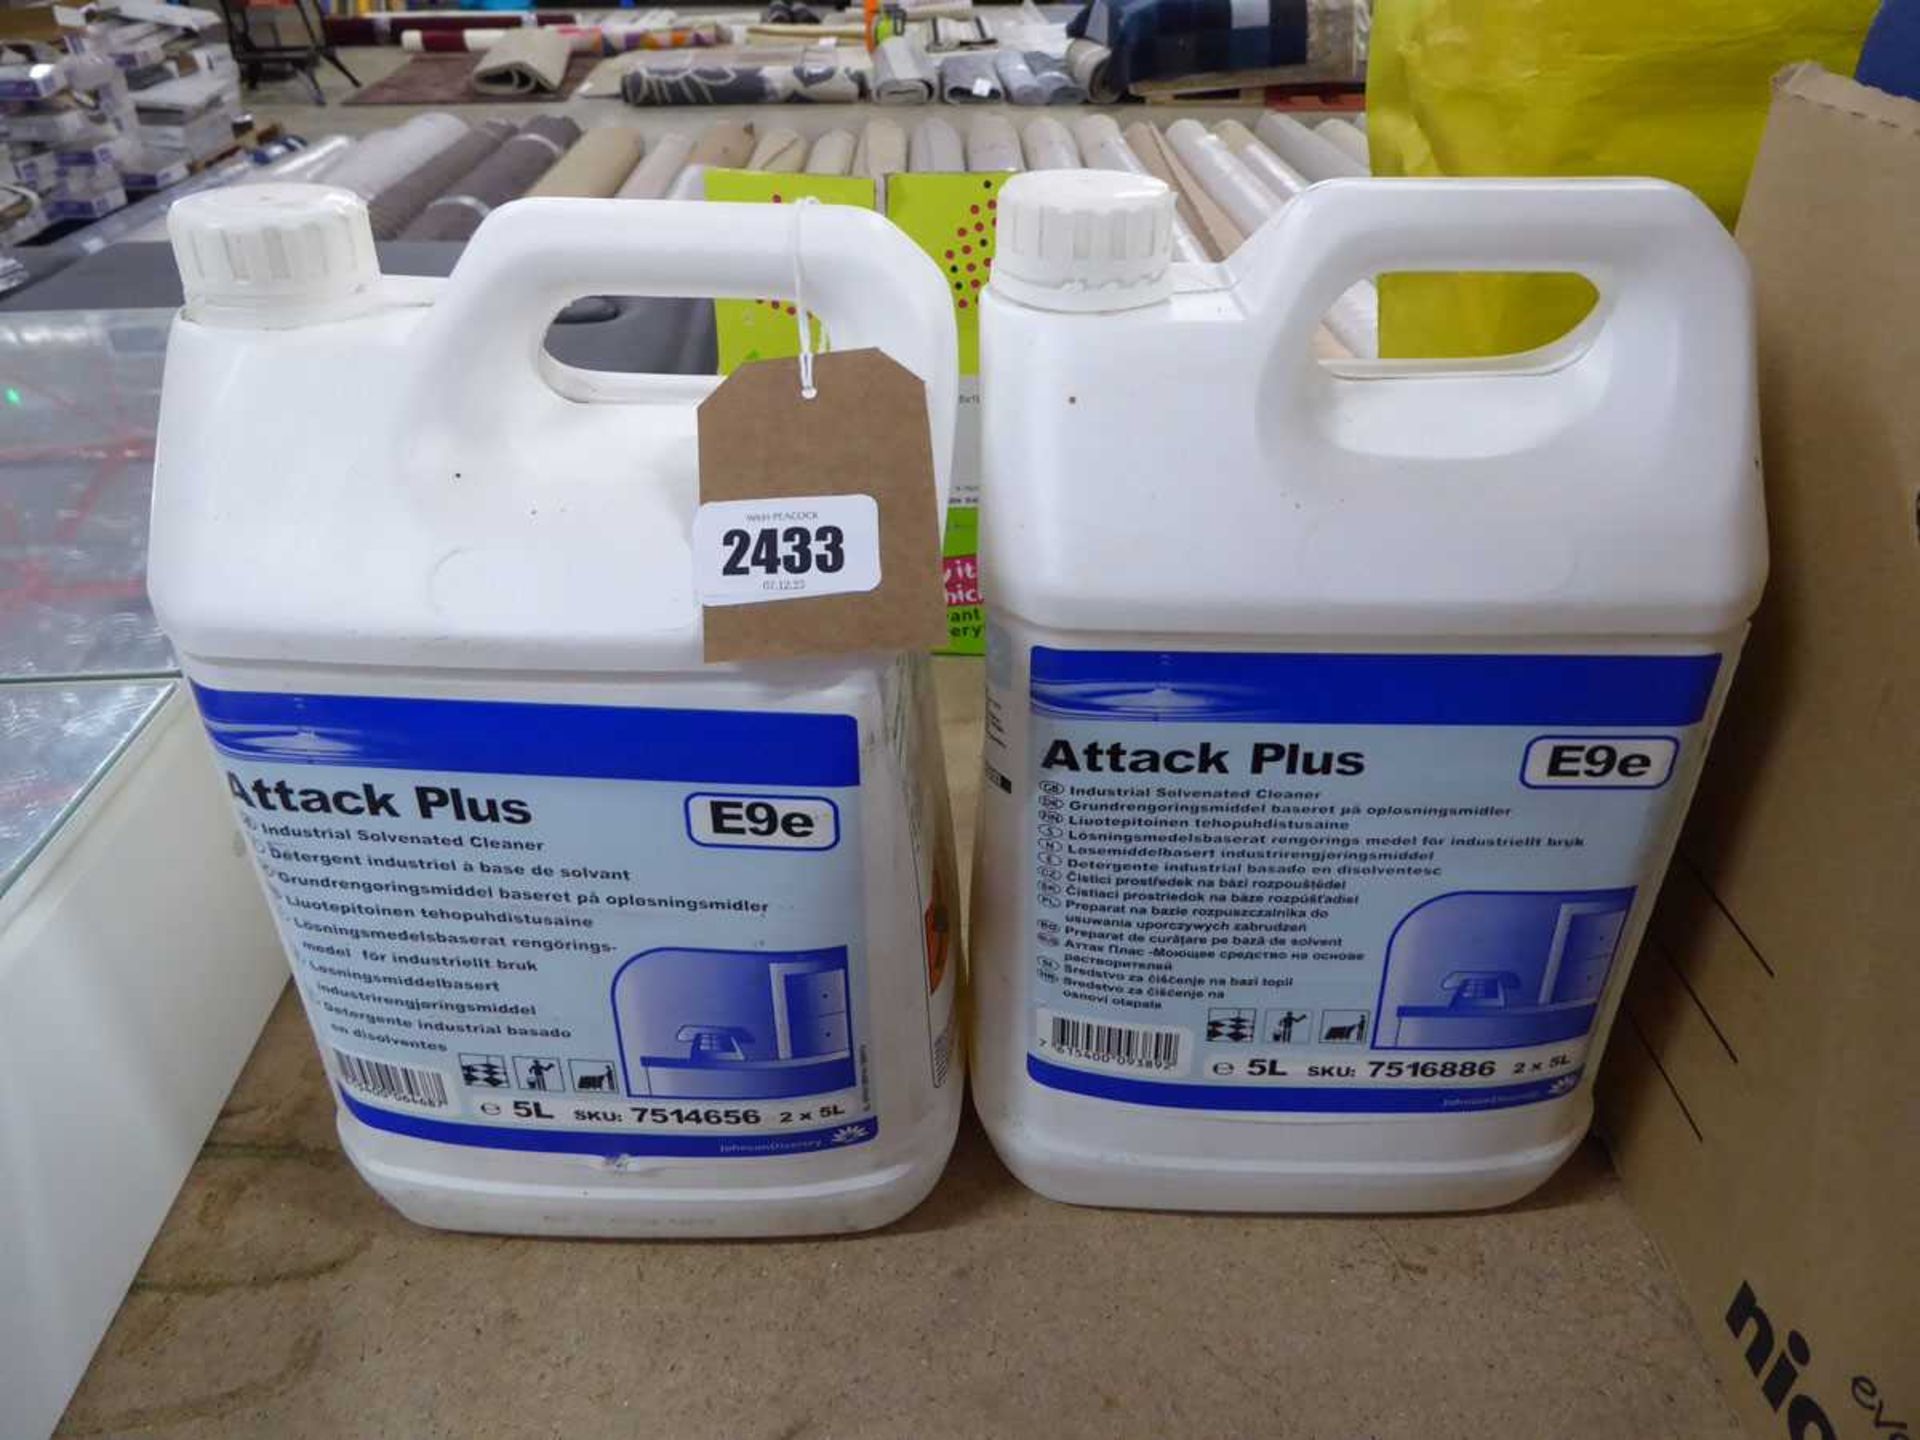 2 5L tubs of industrial solvenated cleaner